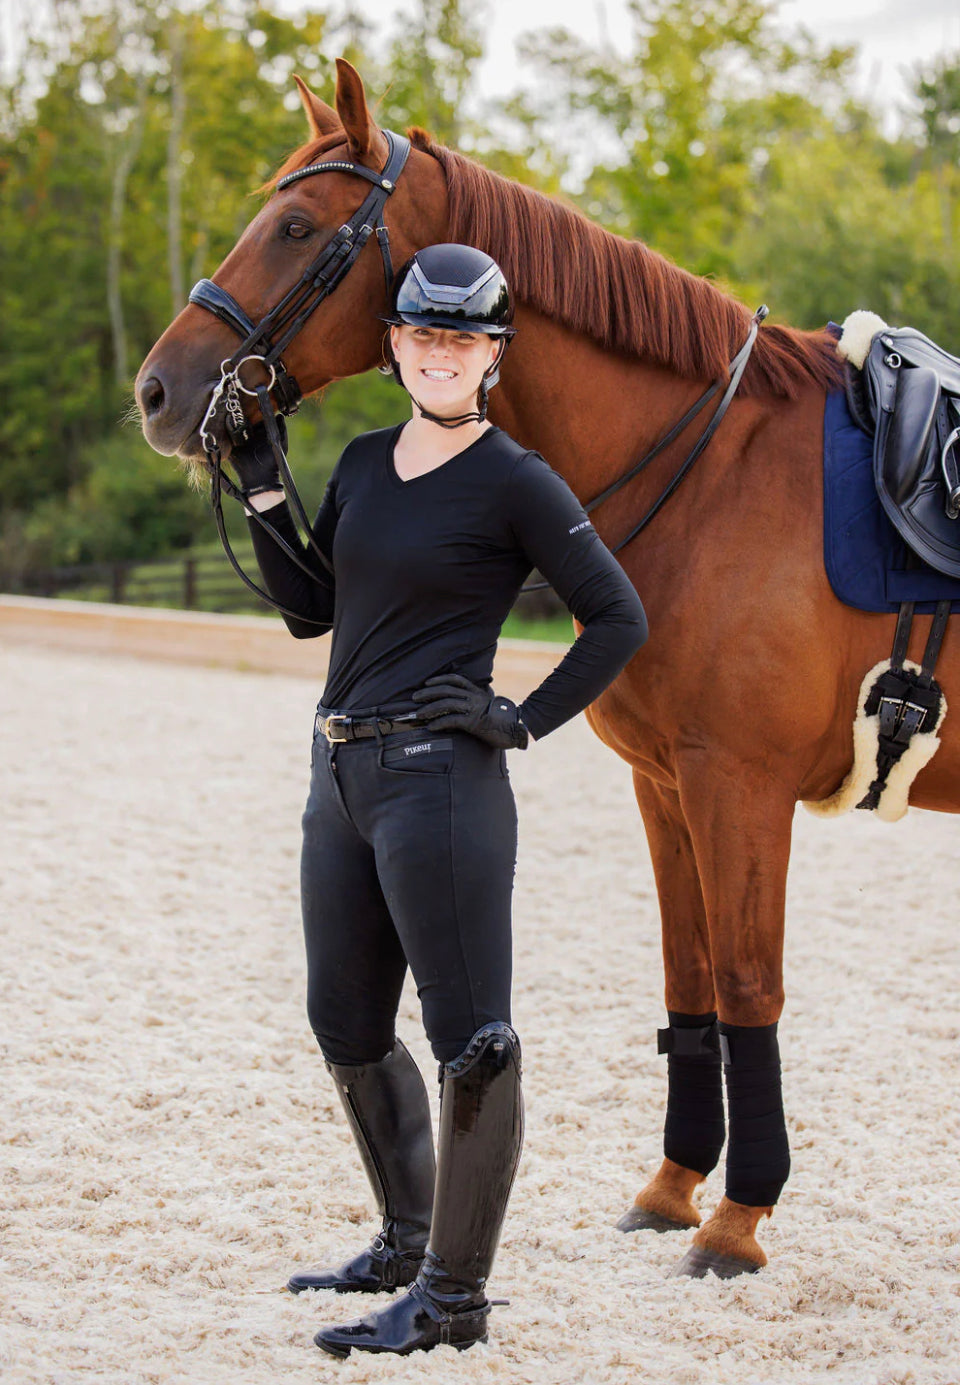 Anatomeq “Here for the Horses” Baselayer Top